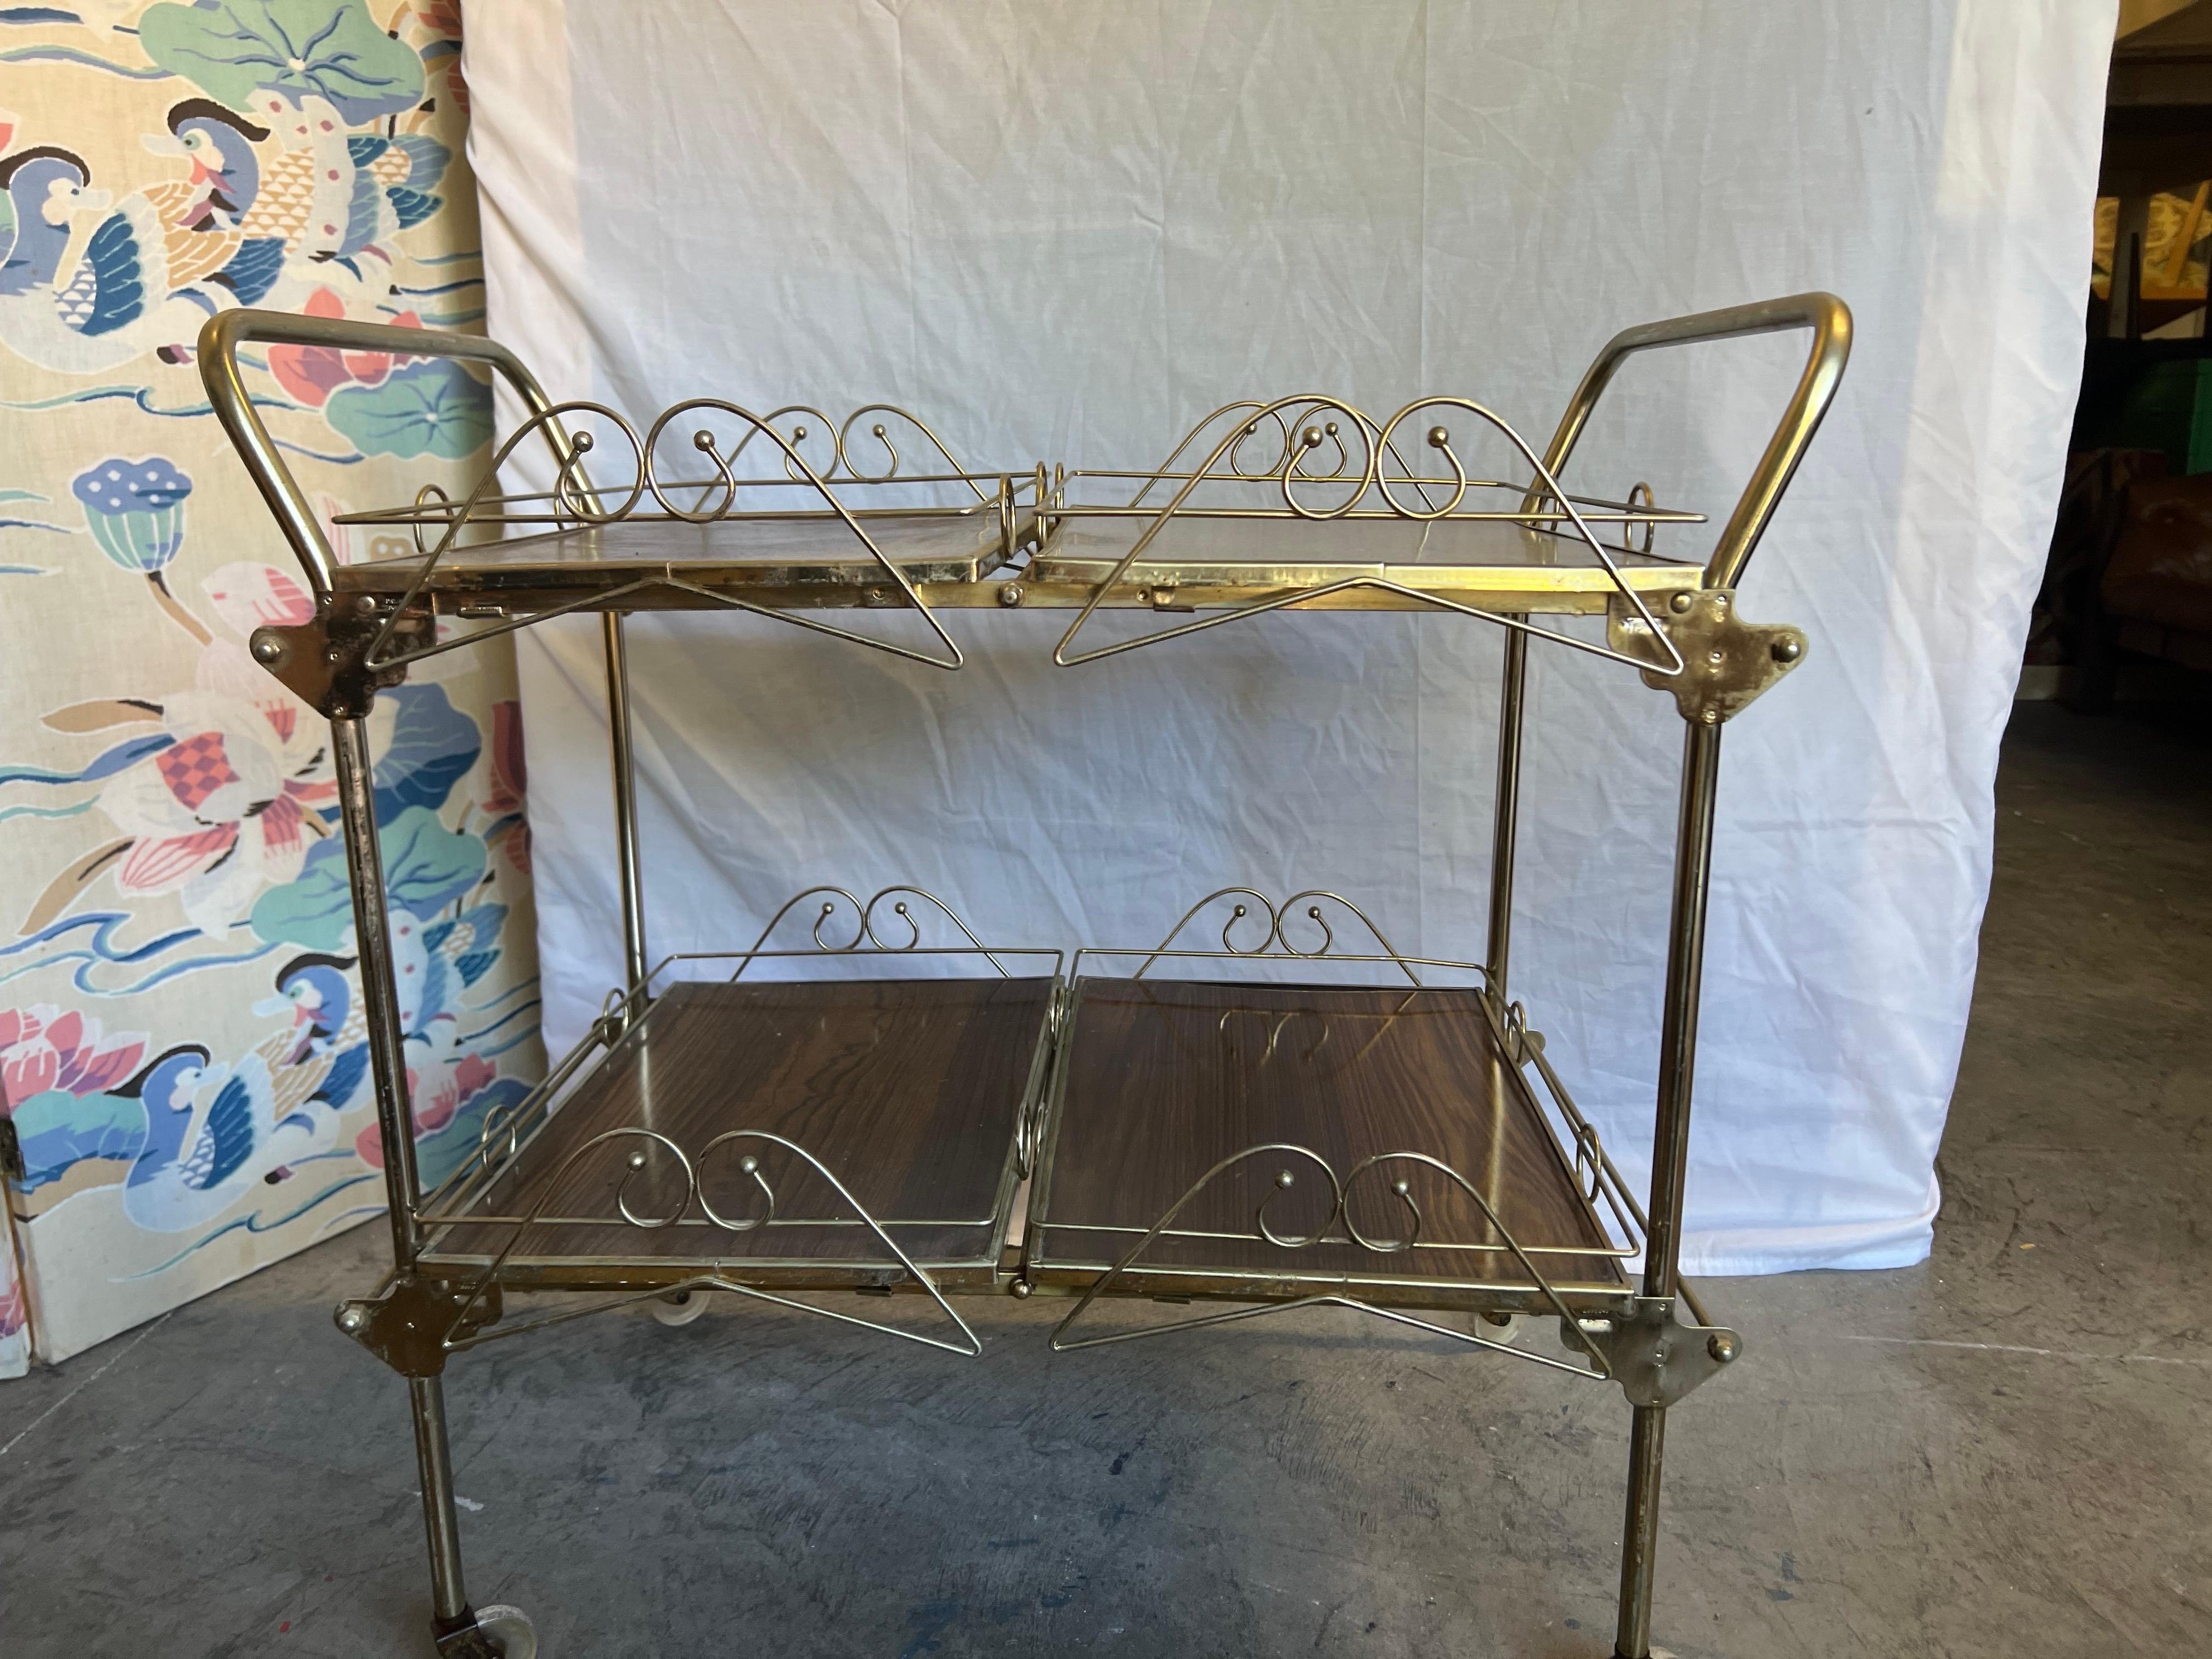 This fantastic bar cart has a beautifully scrolled details and double brass toned handles.   Original lucite wheels still function very well.   The Formica walnut grained trays are all removable and the base has a locking mechanism for when in use. 